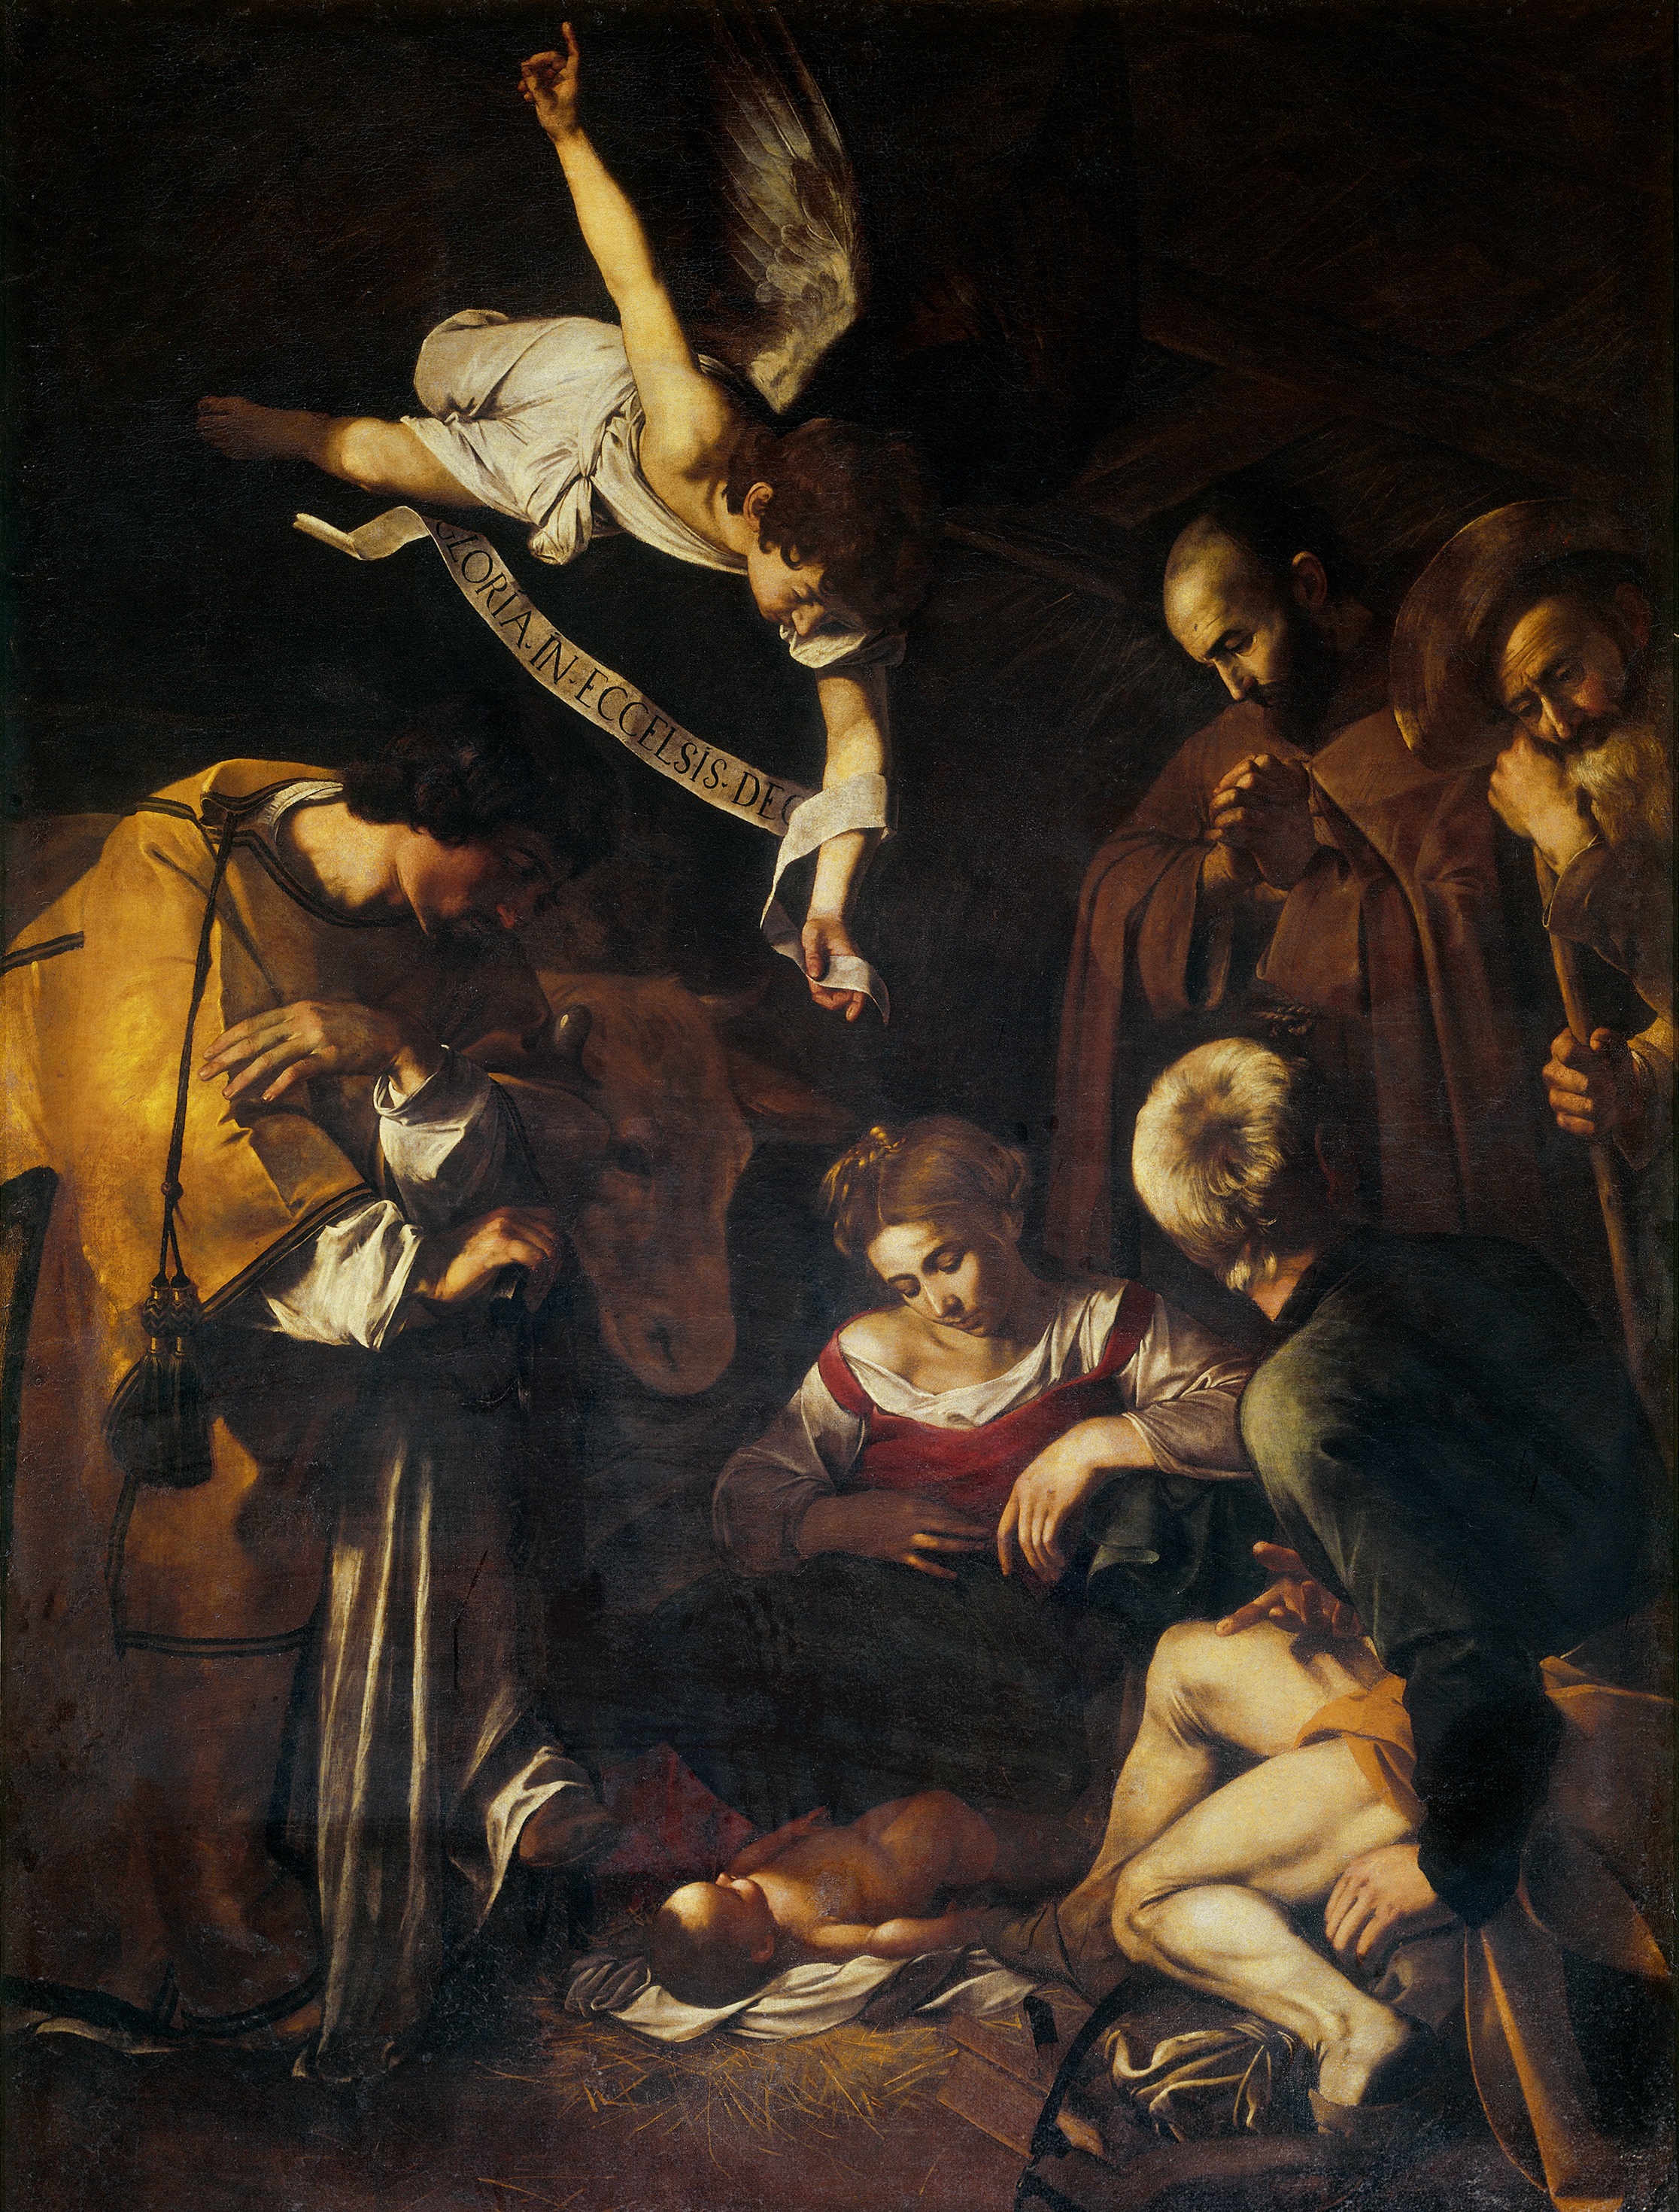 Caravaggio's Nativity with St. Francis, St. Lawrence and St. Francis